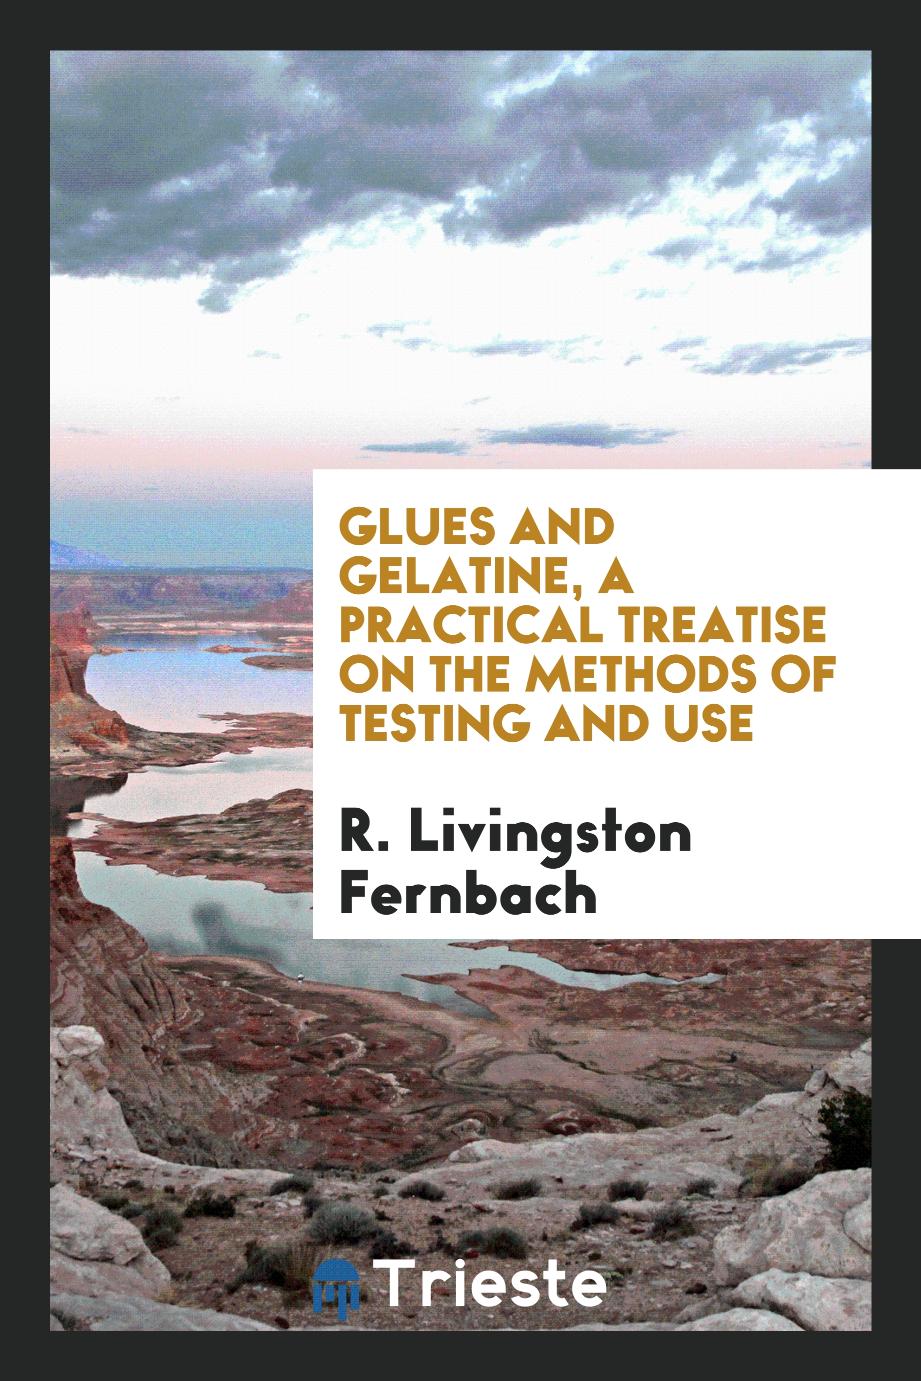 Glues and gelatine, a practical treatise on the methods of testing and use